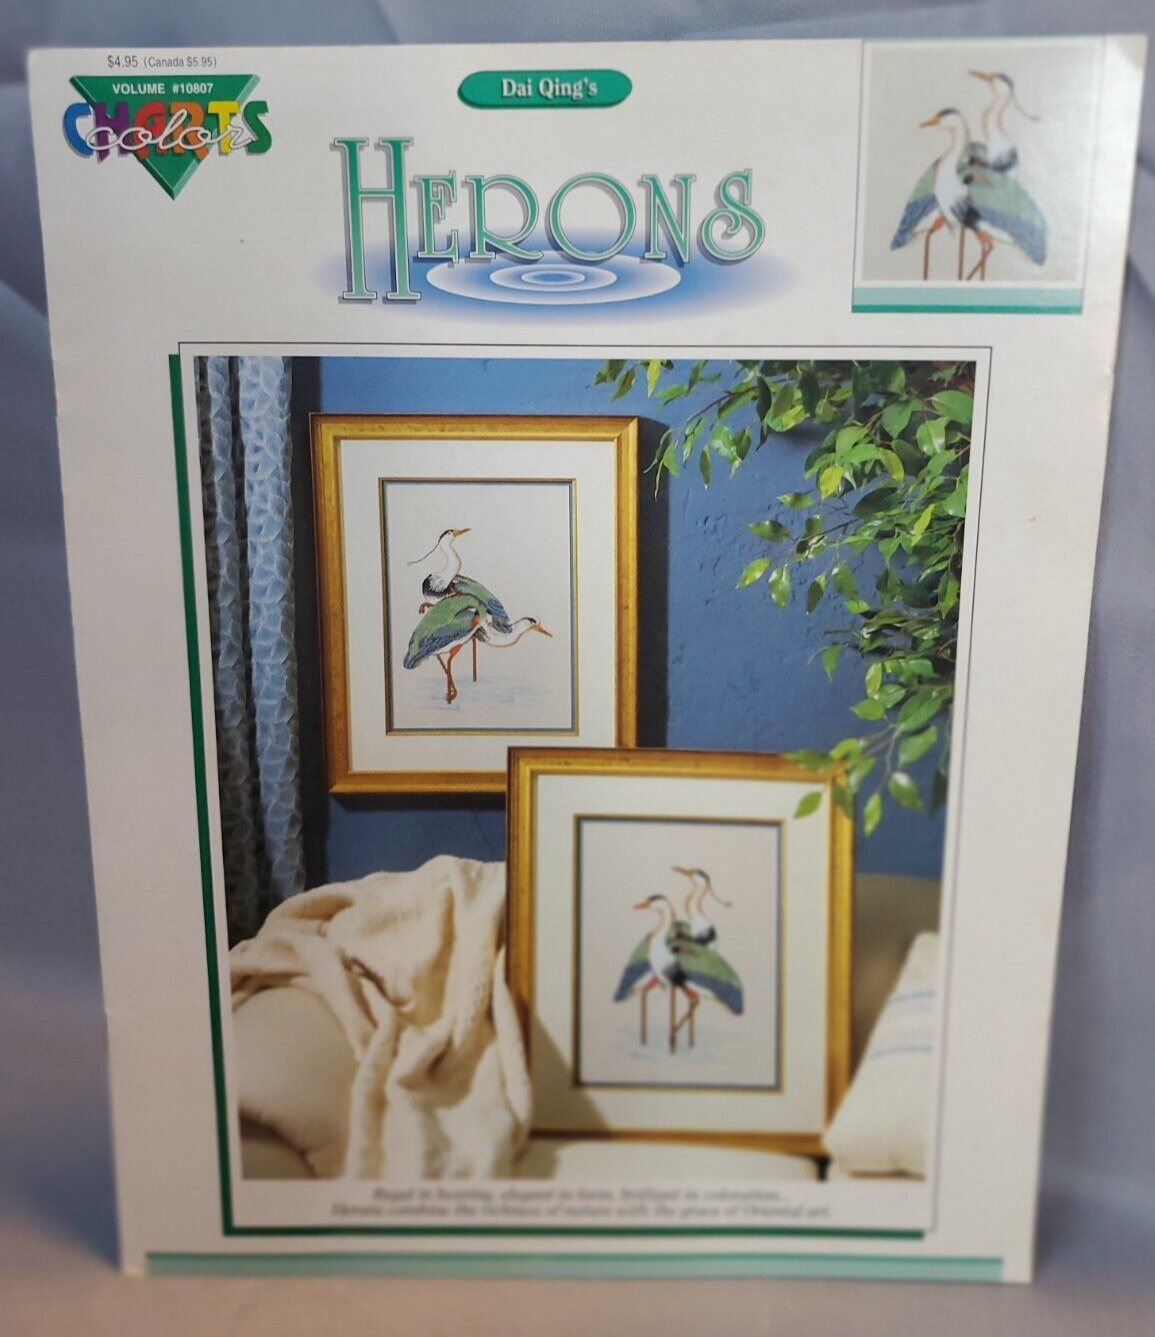 Herons by Dai Qing Counted Cross Stitch Color Chart #10807 Oriental Art Patterns - $11.83